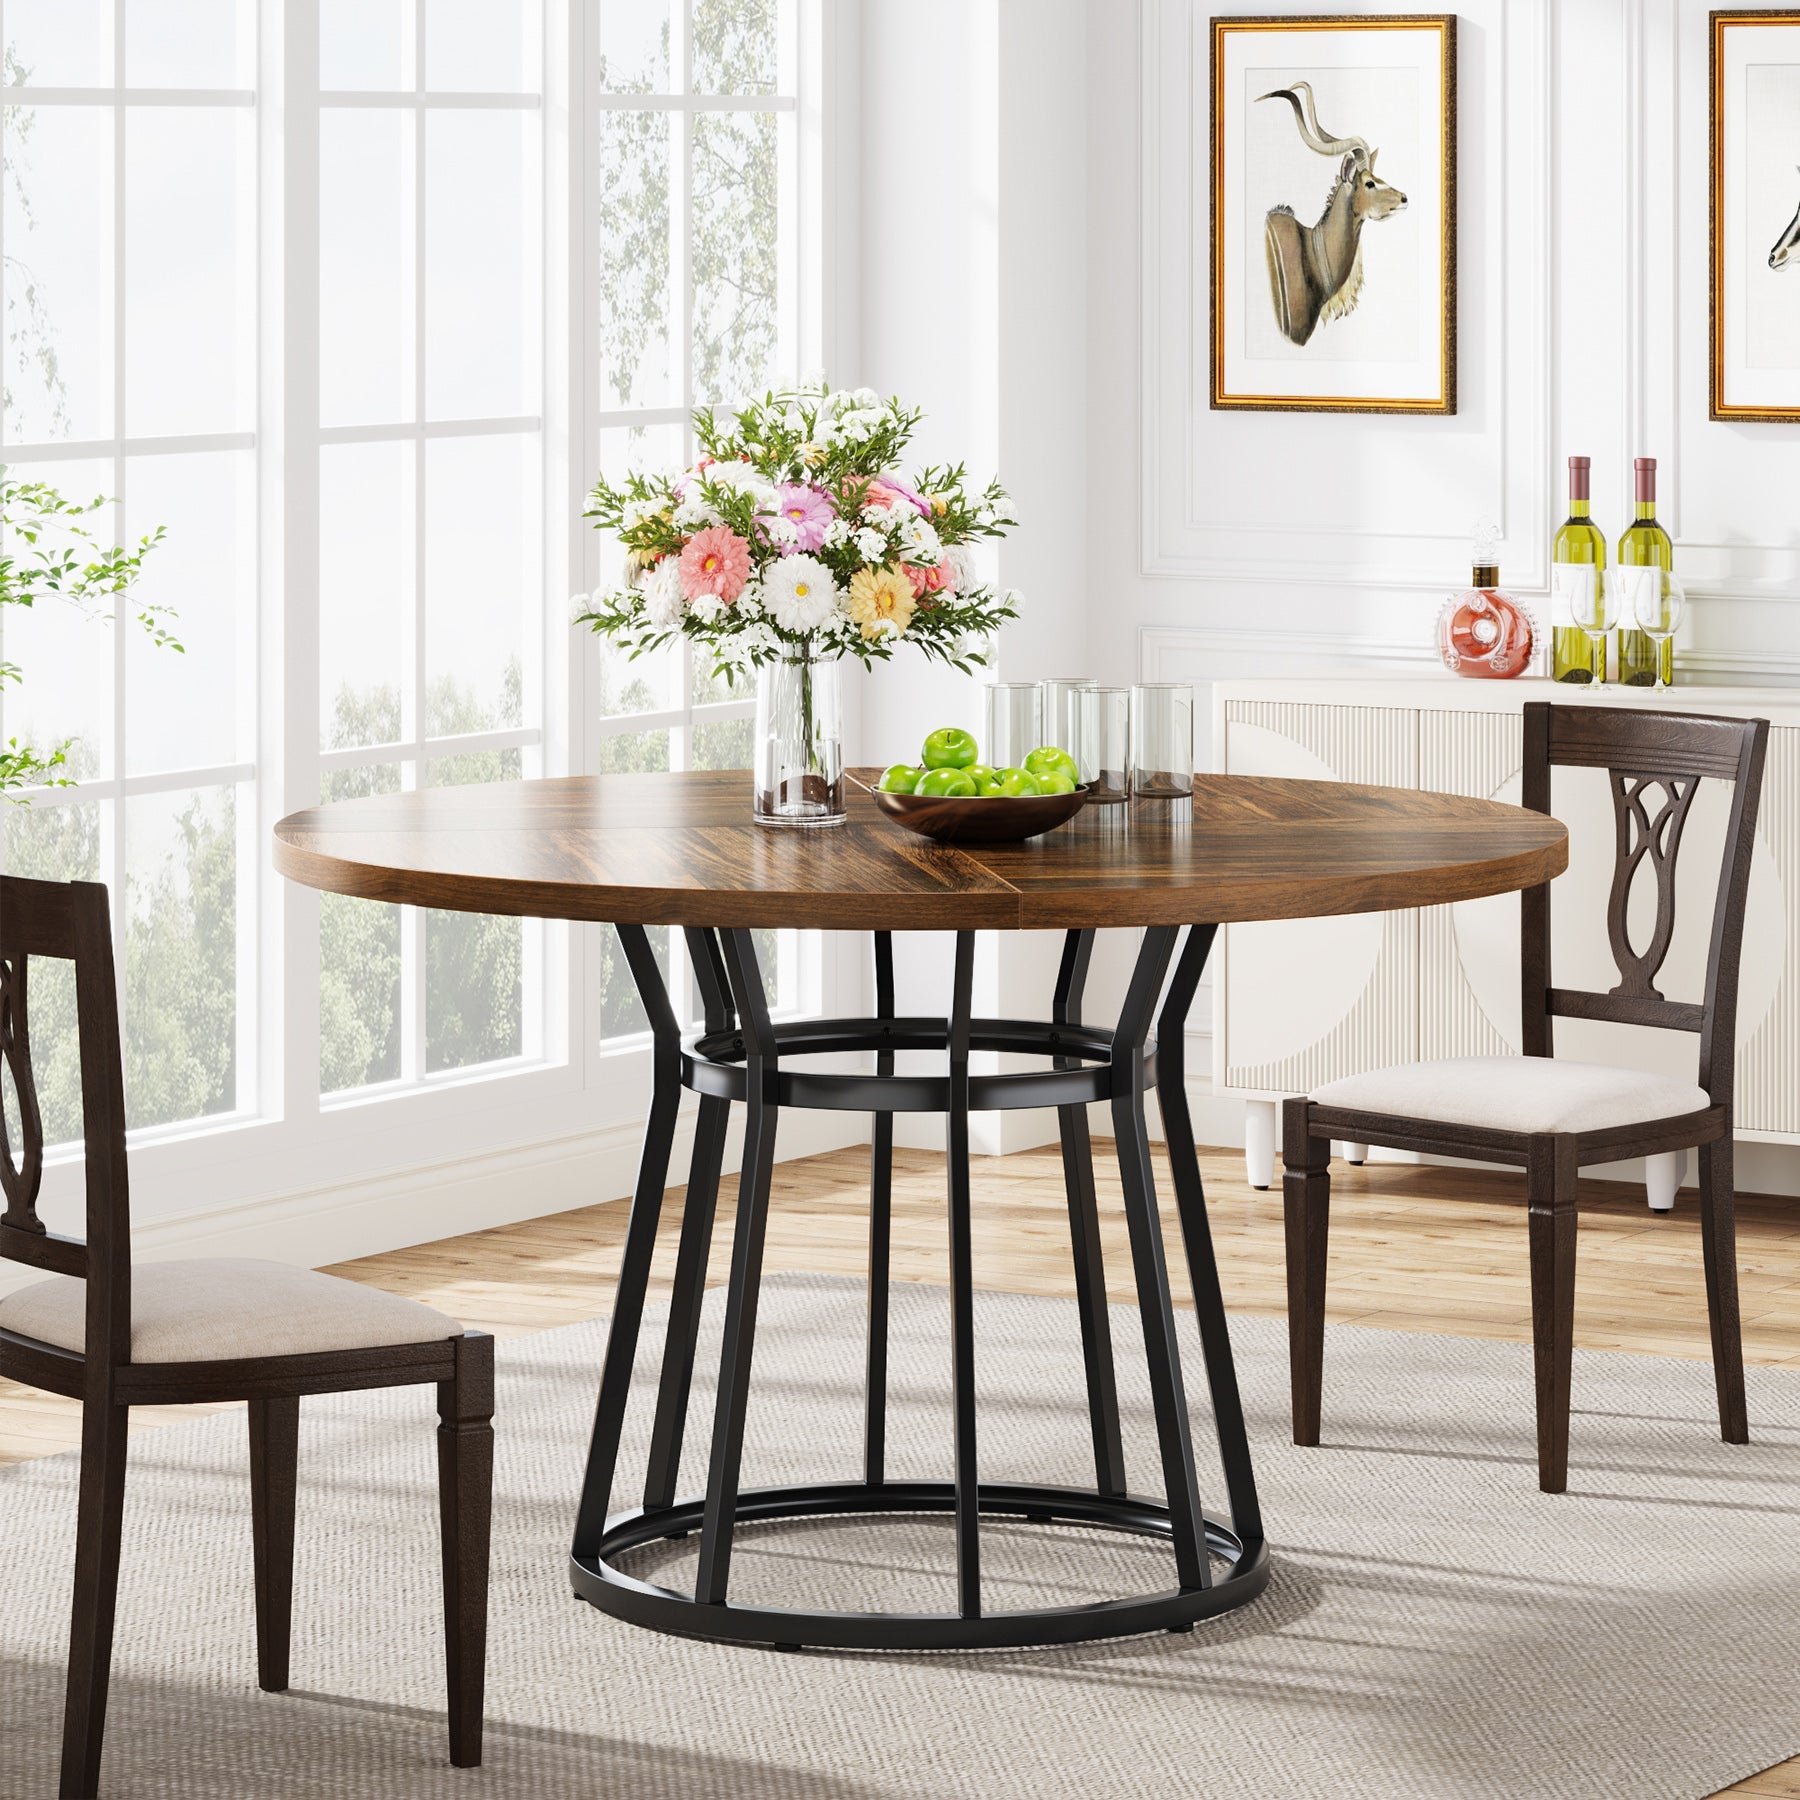 Round Dining Table for 4 People, 47.2